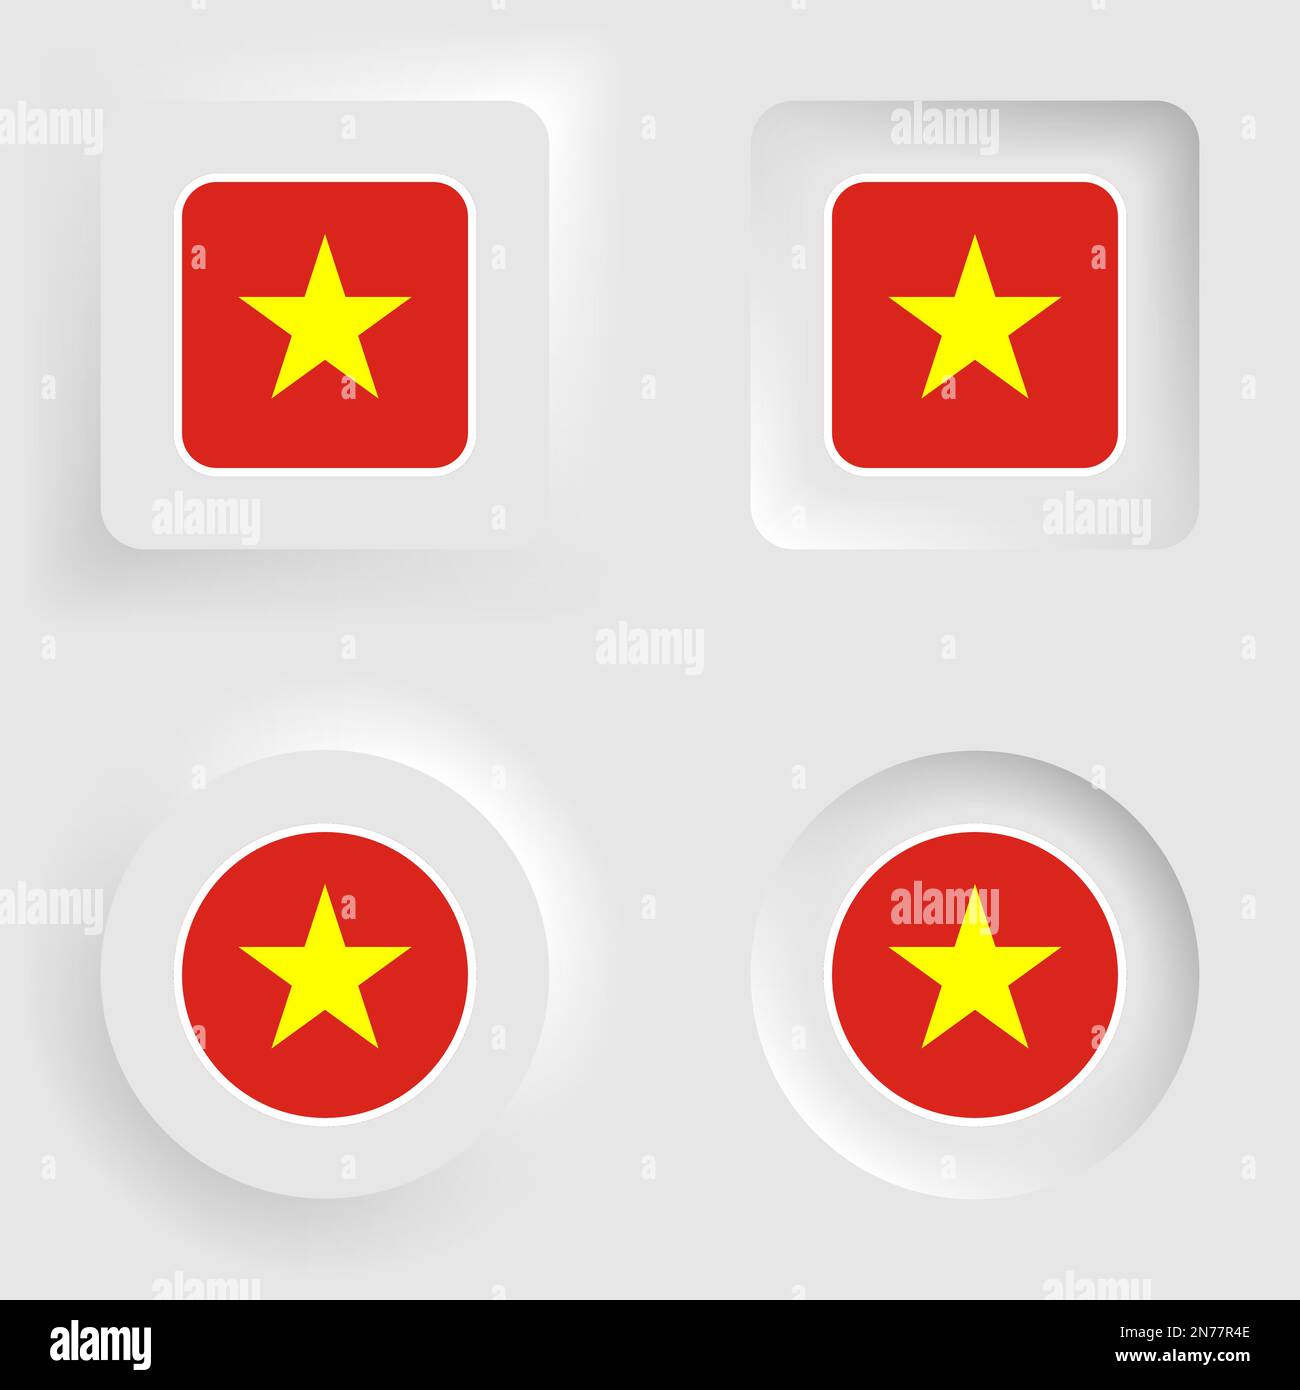 Vietnam neumorphic graphic and label set. Element of impact for the use you want to make of it. Stock Vector